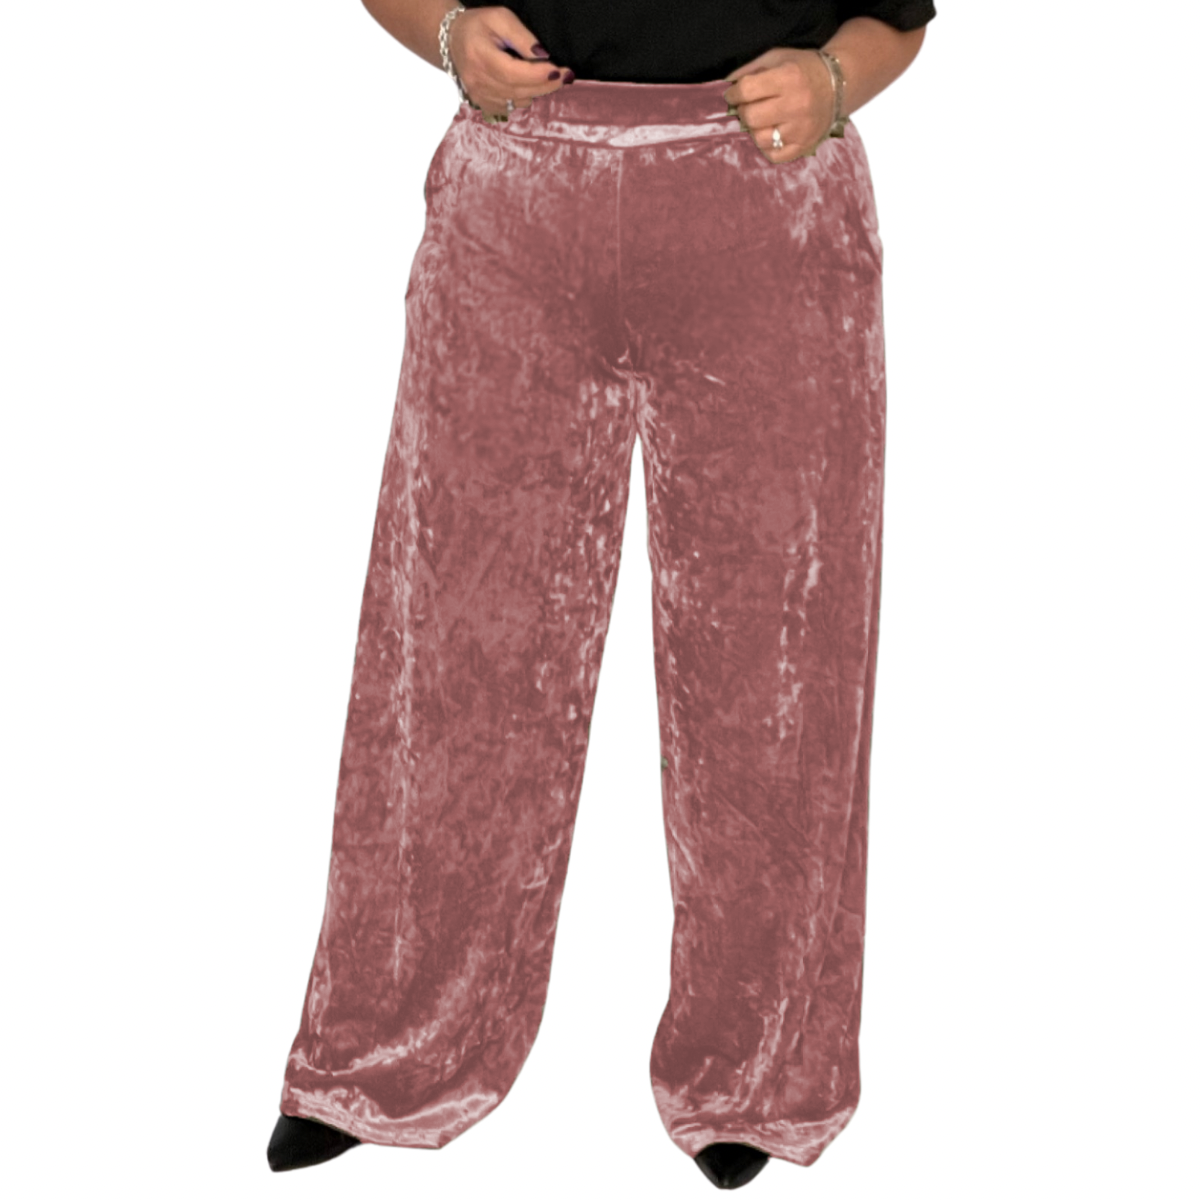 CRUSHED VELVET TROUSERS WITH HIGH ELASTIC WAIST AND POCKETS